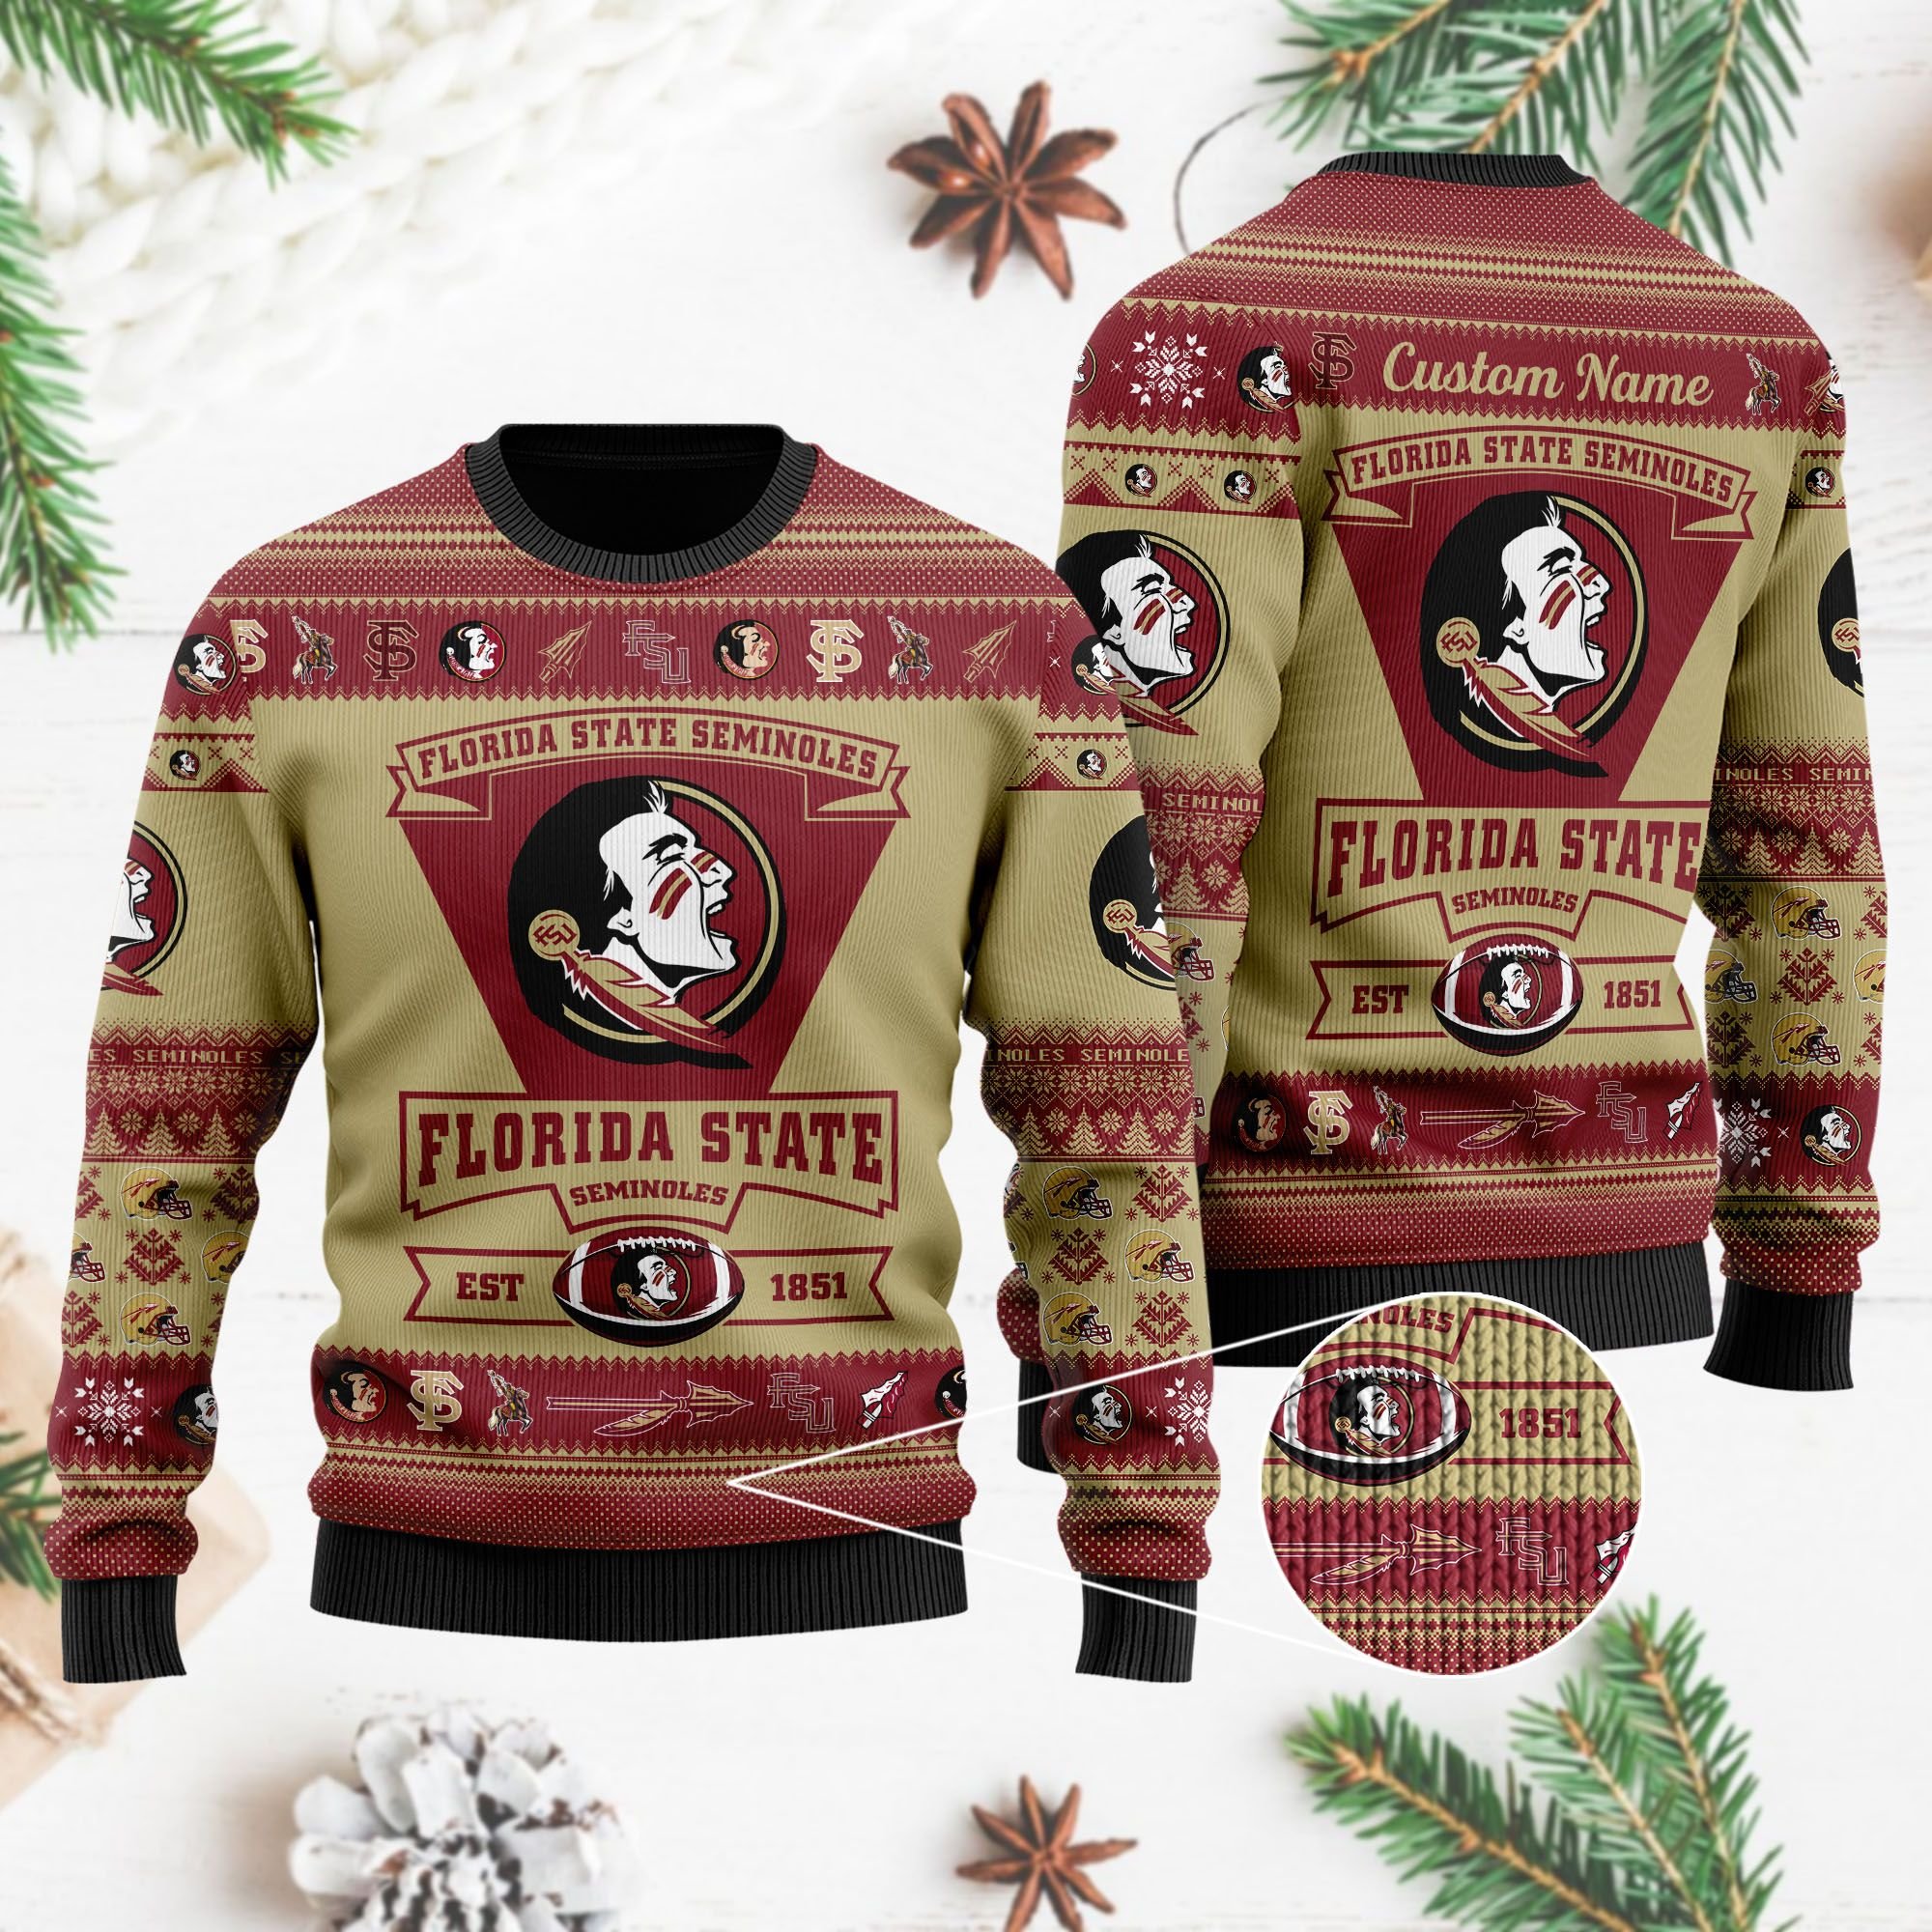 Florida State Seminoles Football Team Logo Personalized Ugly Christmas Sweater, Ugly Sweater, Christmas Sweaters, Hoodie, Sweatshirt, Sweater